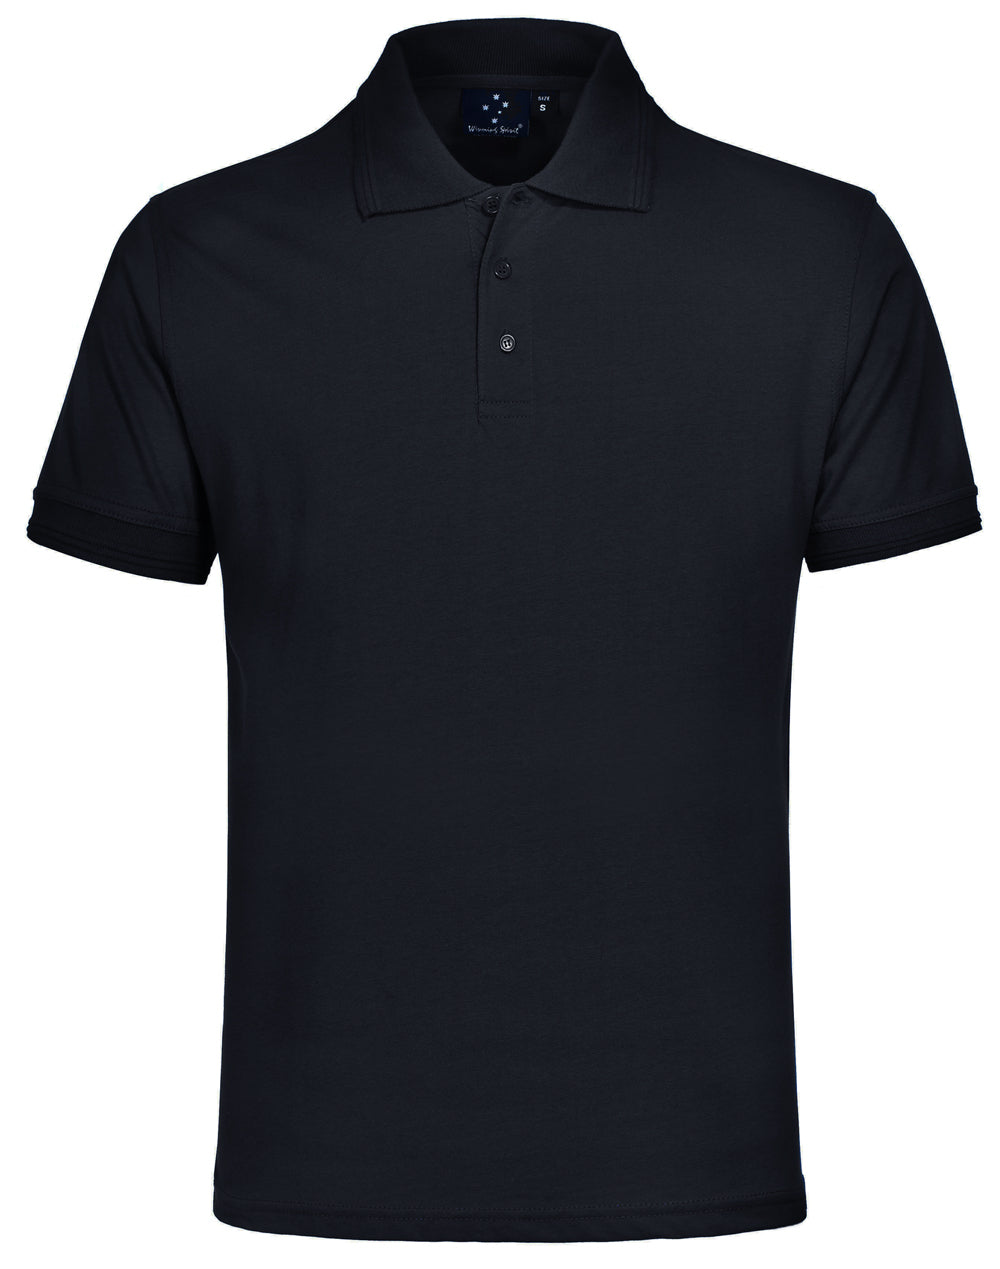 210g Combed Cotton Jersey Polo - made by AIW